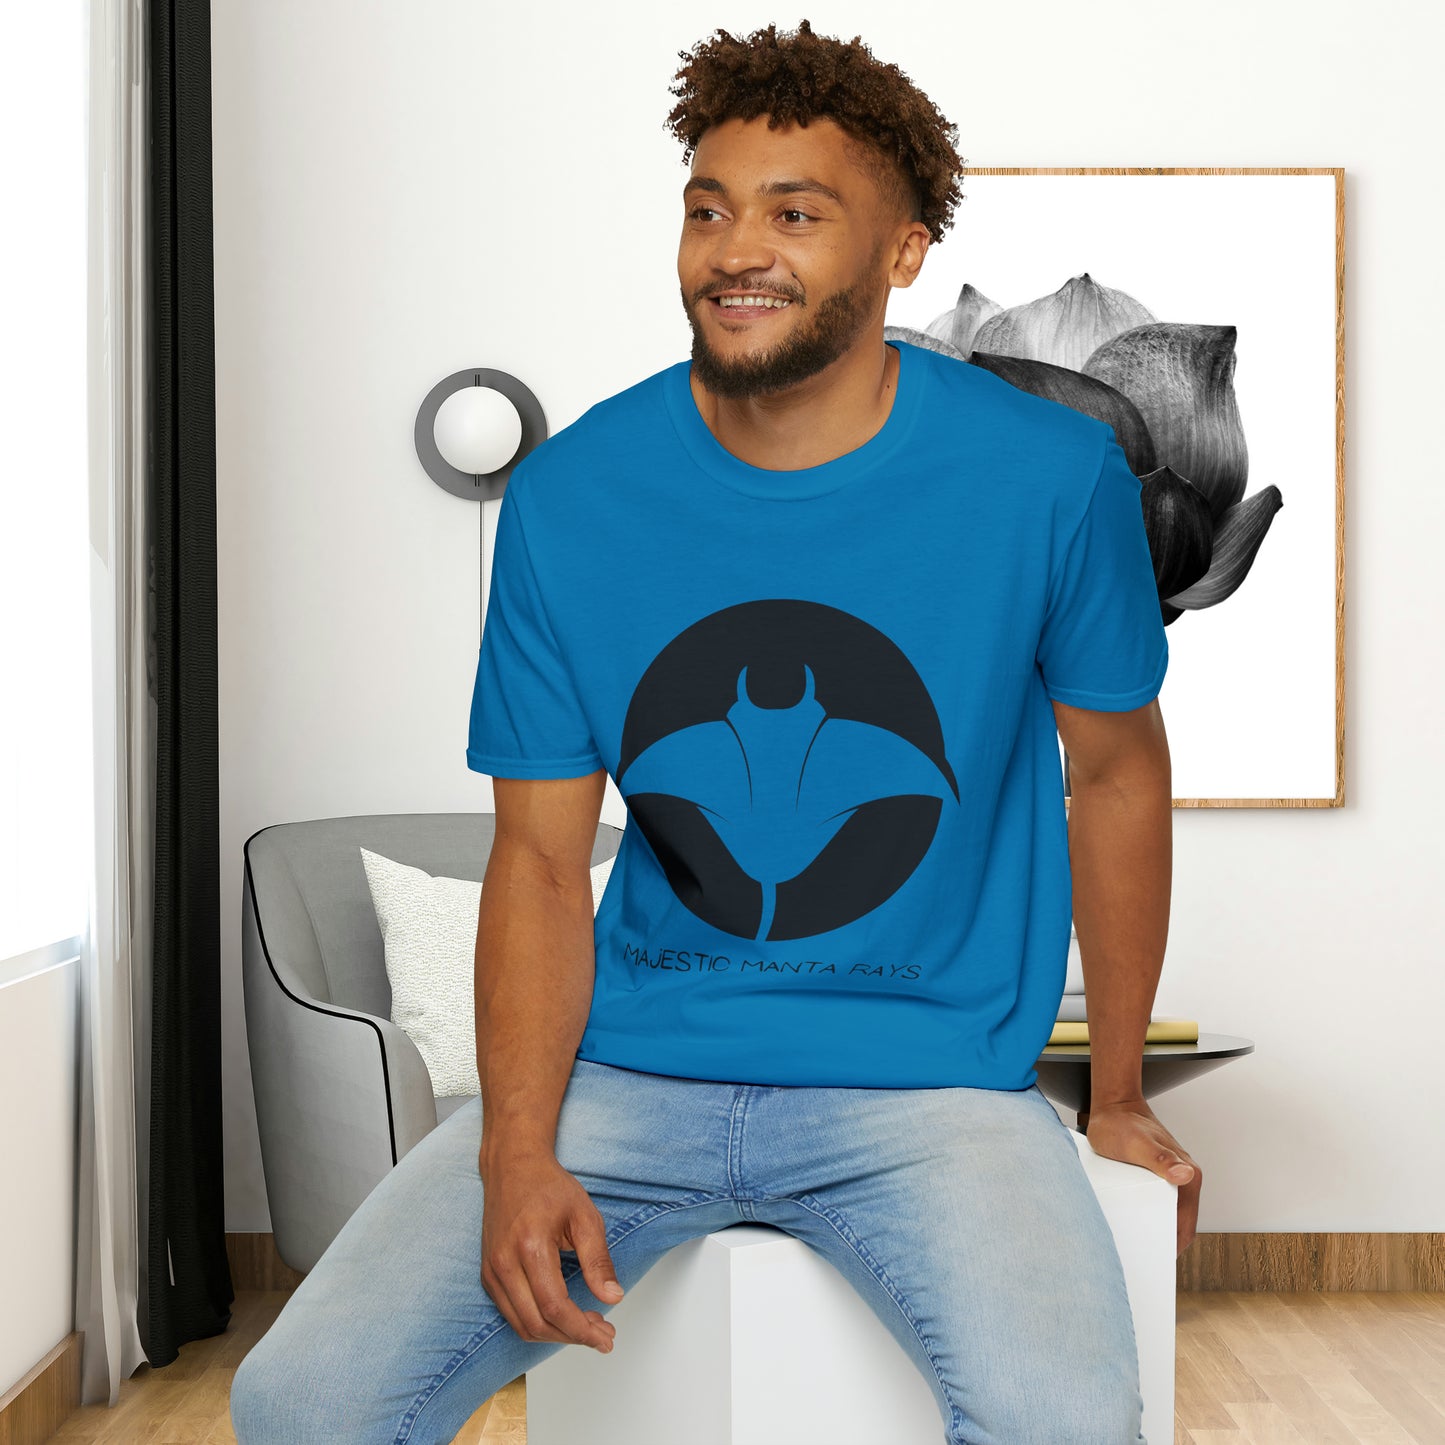 Black and white Majestic Manta Rays Design on this Unisex Softstyle T-Shirt. These giants seemingly fly through the water so gracefully, just watch and don’t touch.